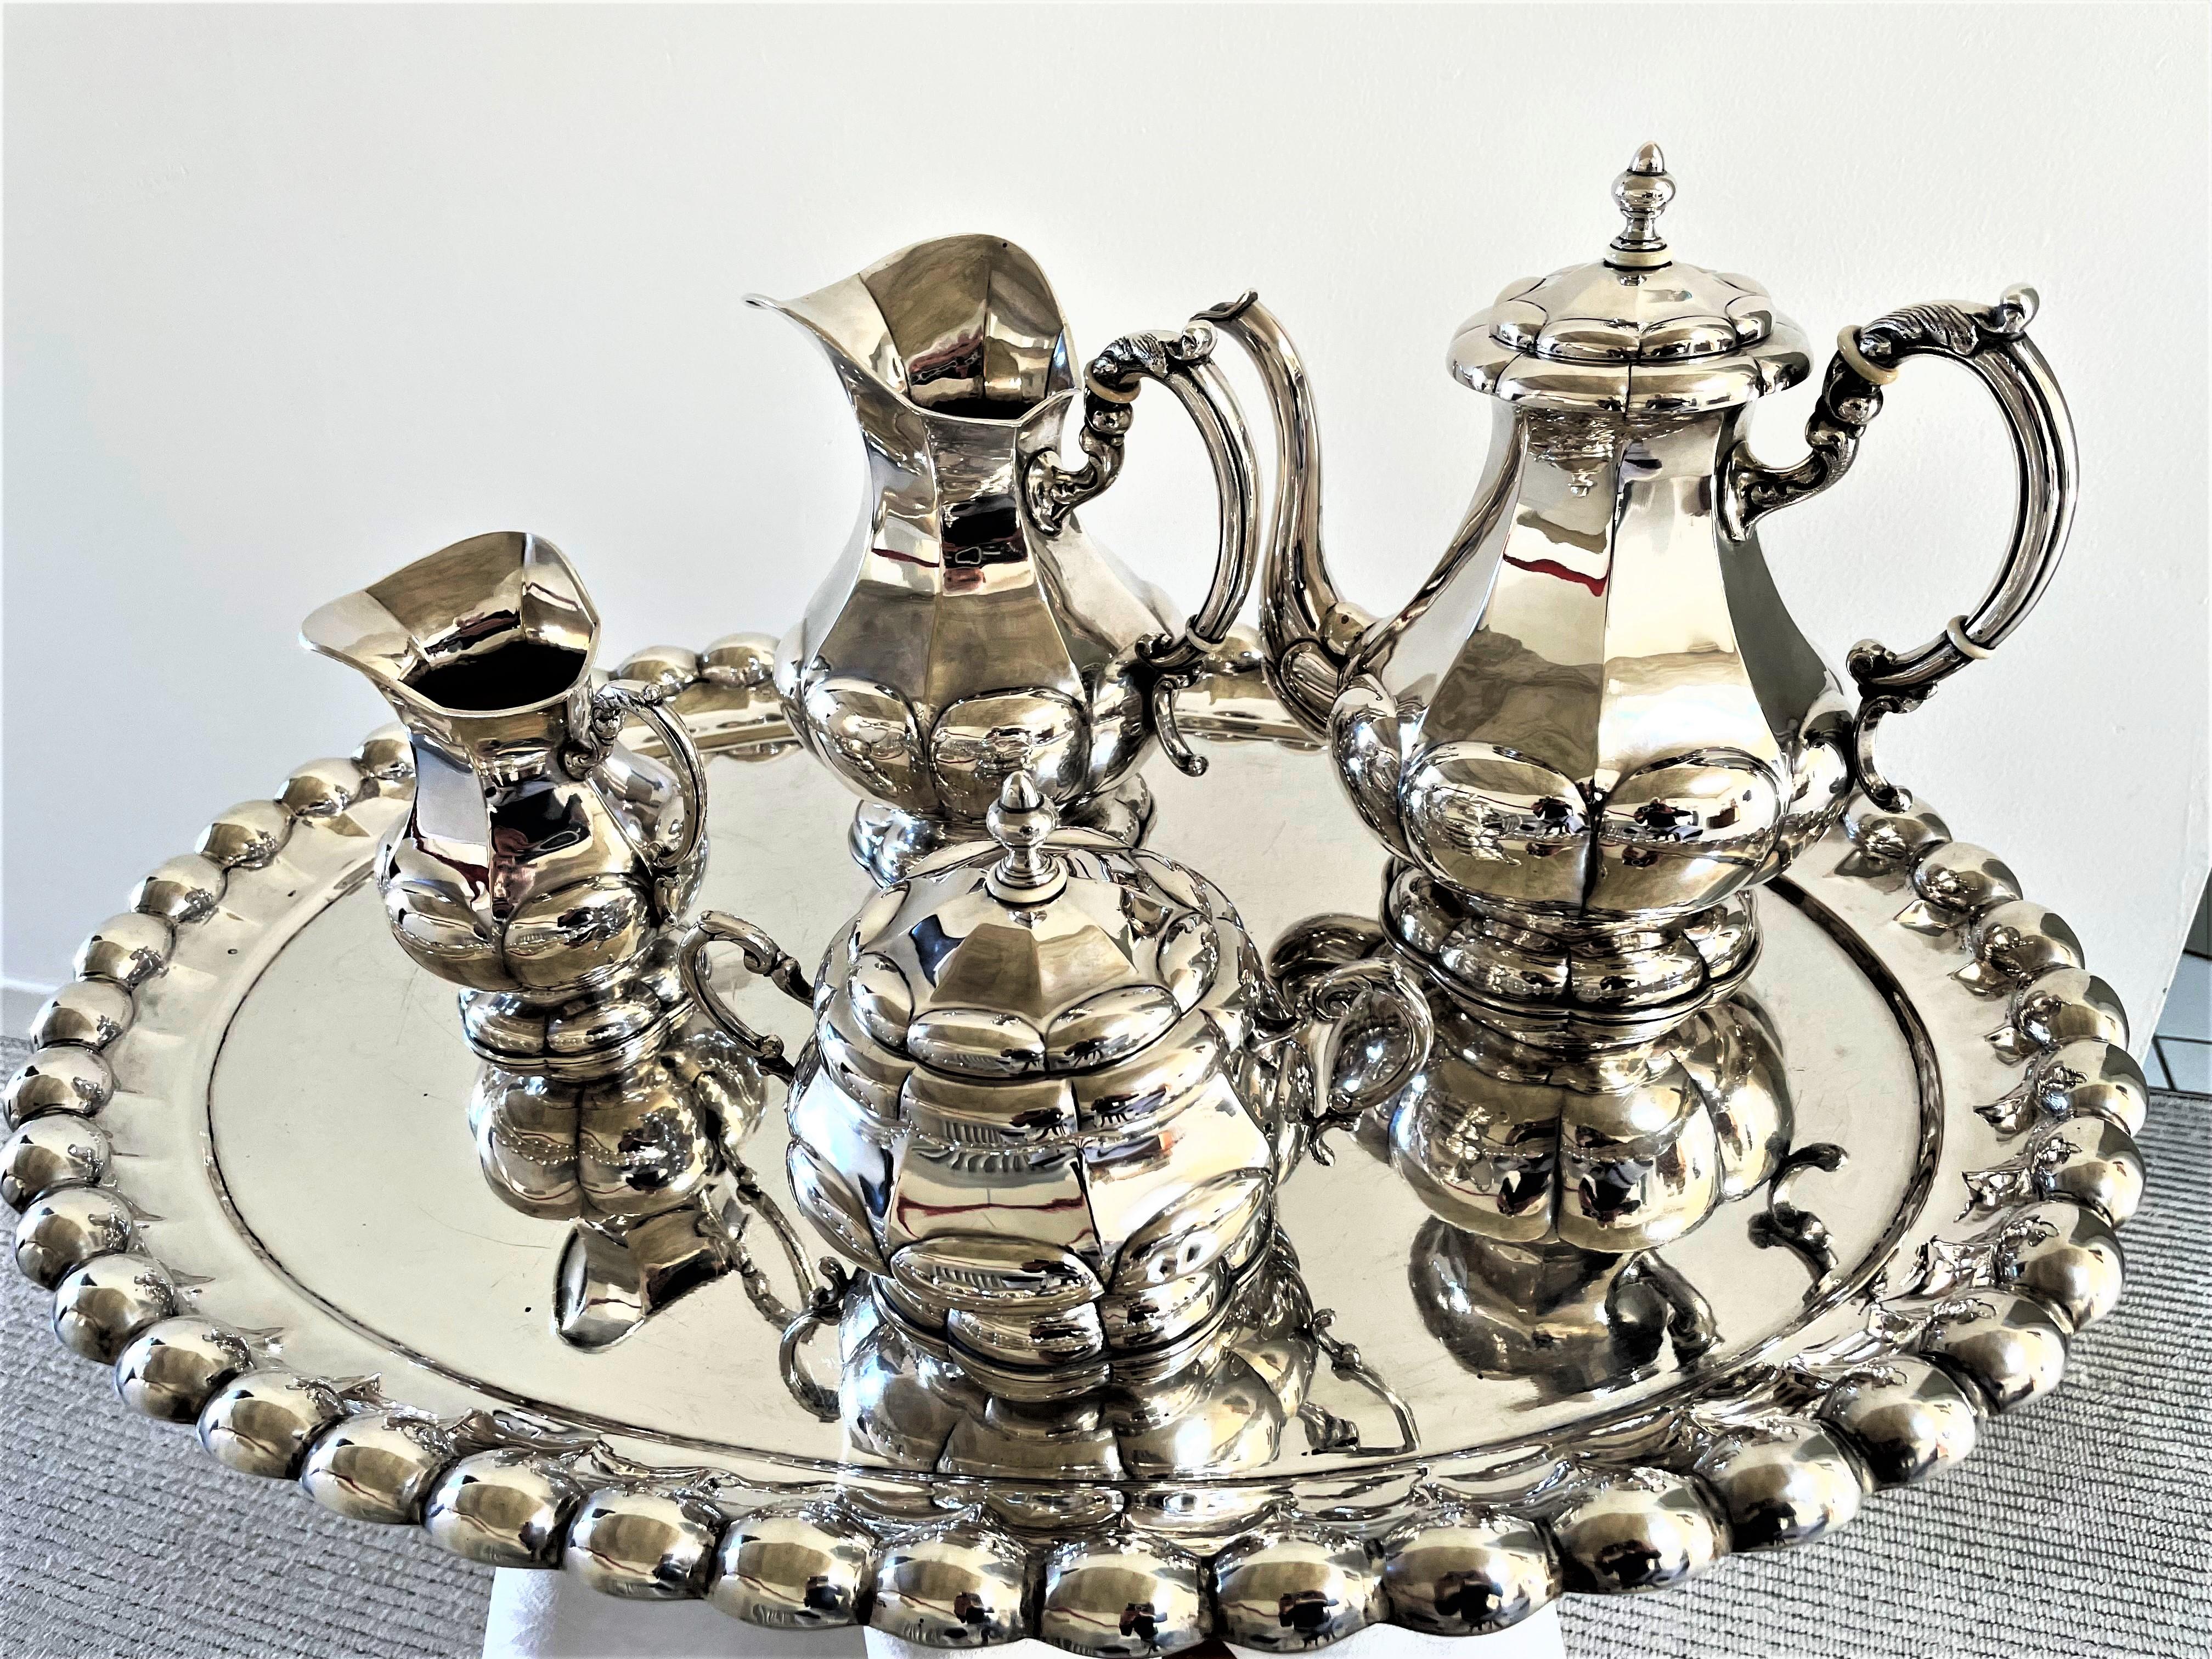 Austria-Hungary sterling silver 5 parts coffee service with tray, 1870s - 1920s For Sale 15